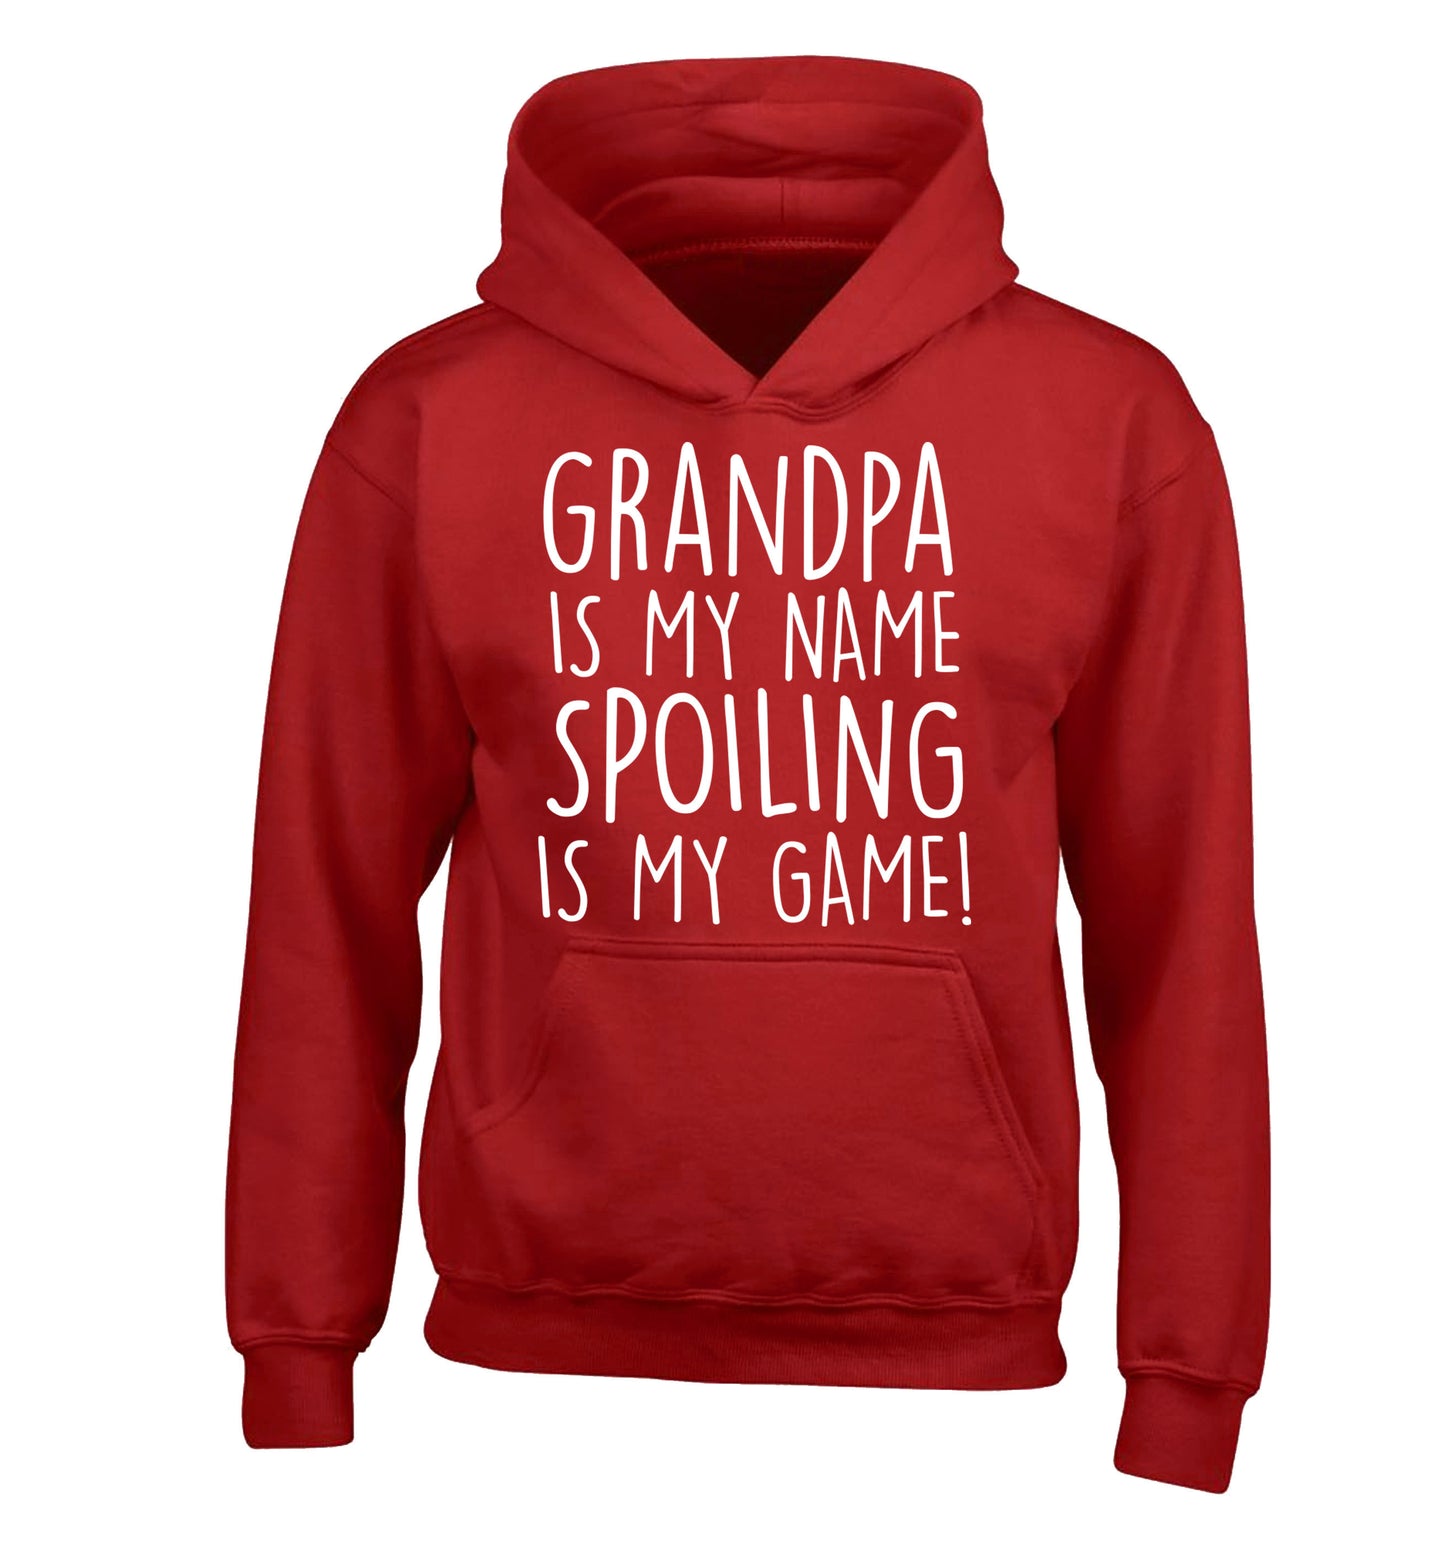 Grandpa is my name, spoiling is my game children's red hoodie 12-14 Years